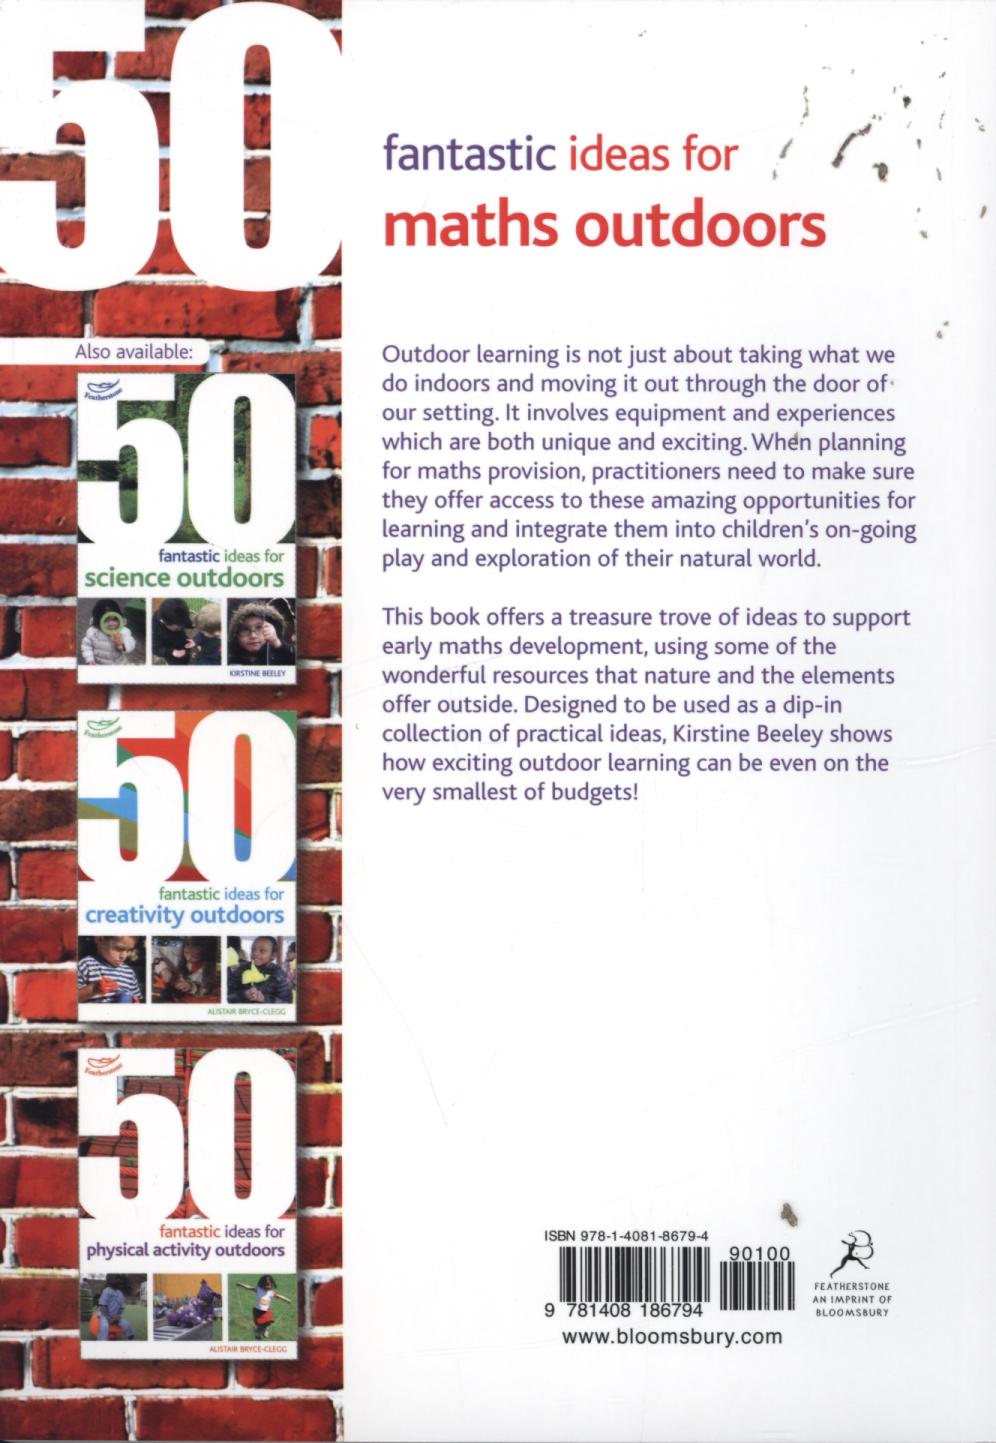 50 Fantastic Ideas for Maths Outdoors